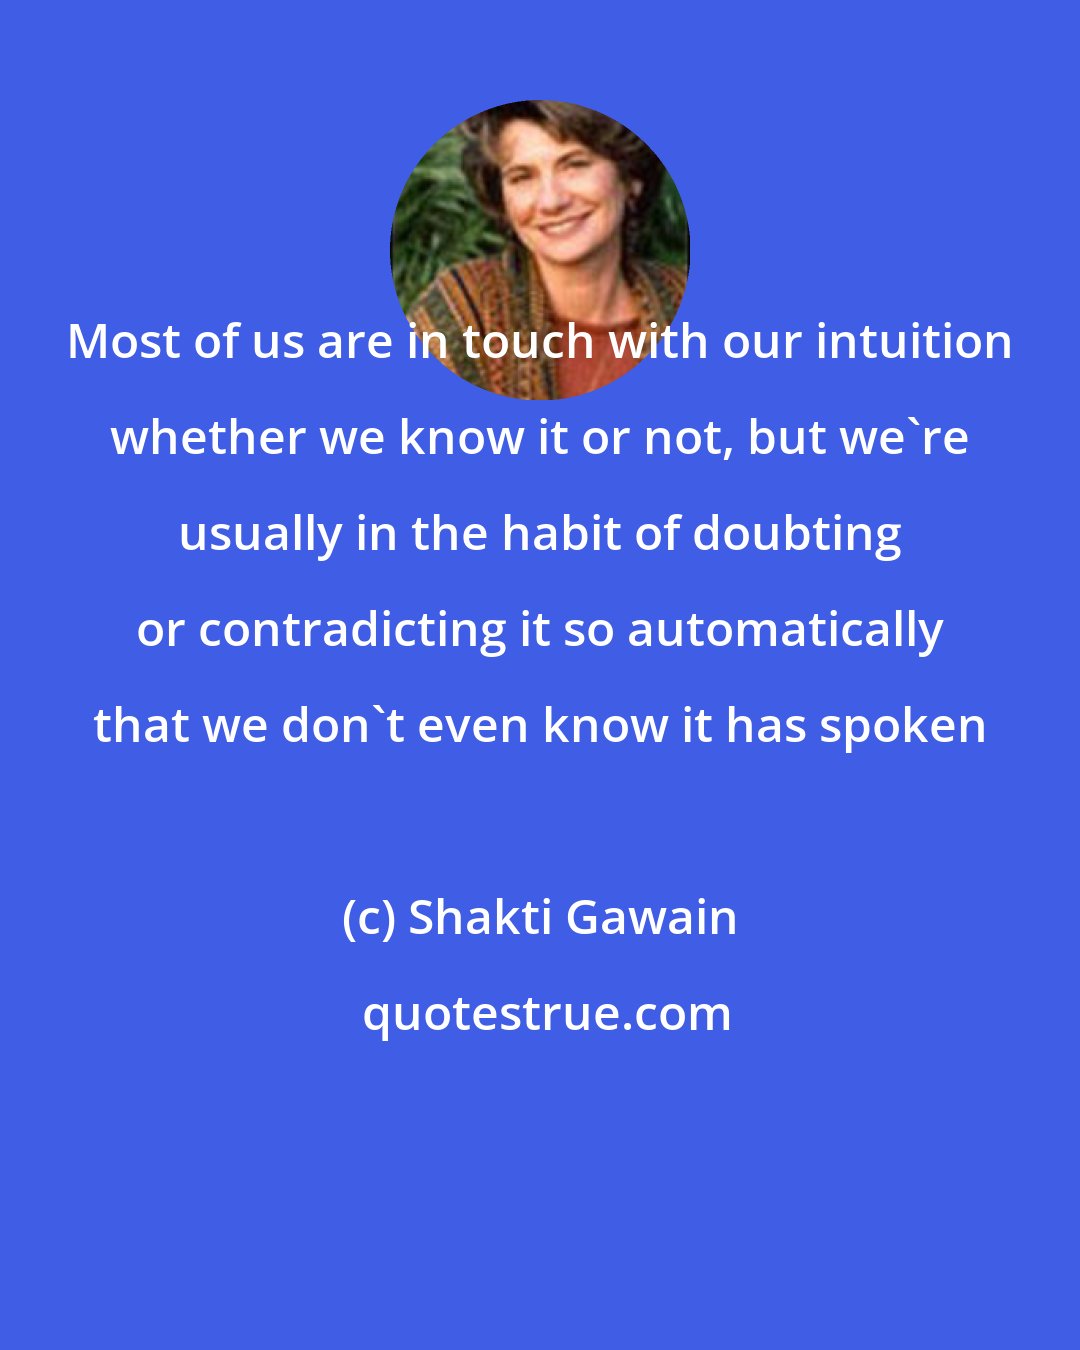 Shakti Gawain: Most of us are in touch with our intuition whether we know it or not, but we're usually in the habit of doubting or contradicting it so automatically that we don't even know it has spoken